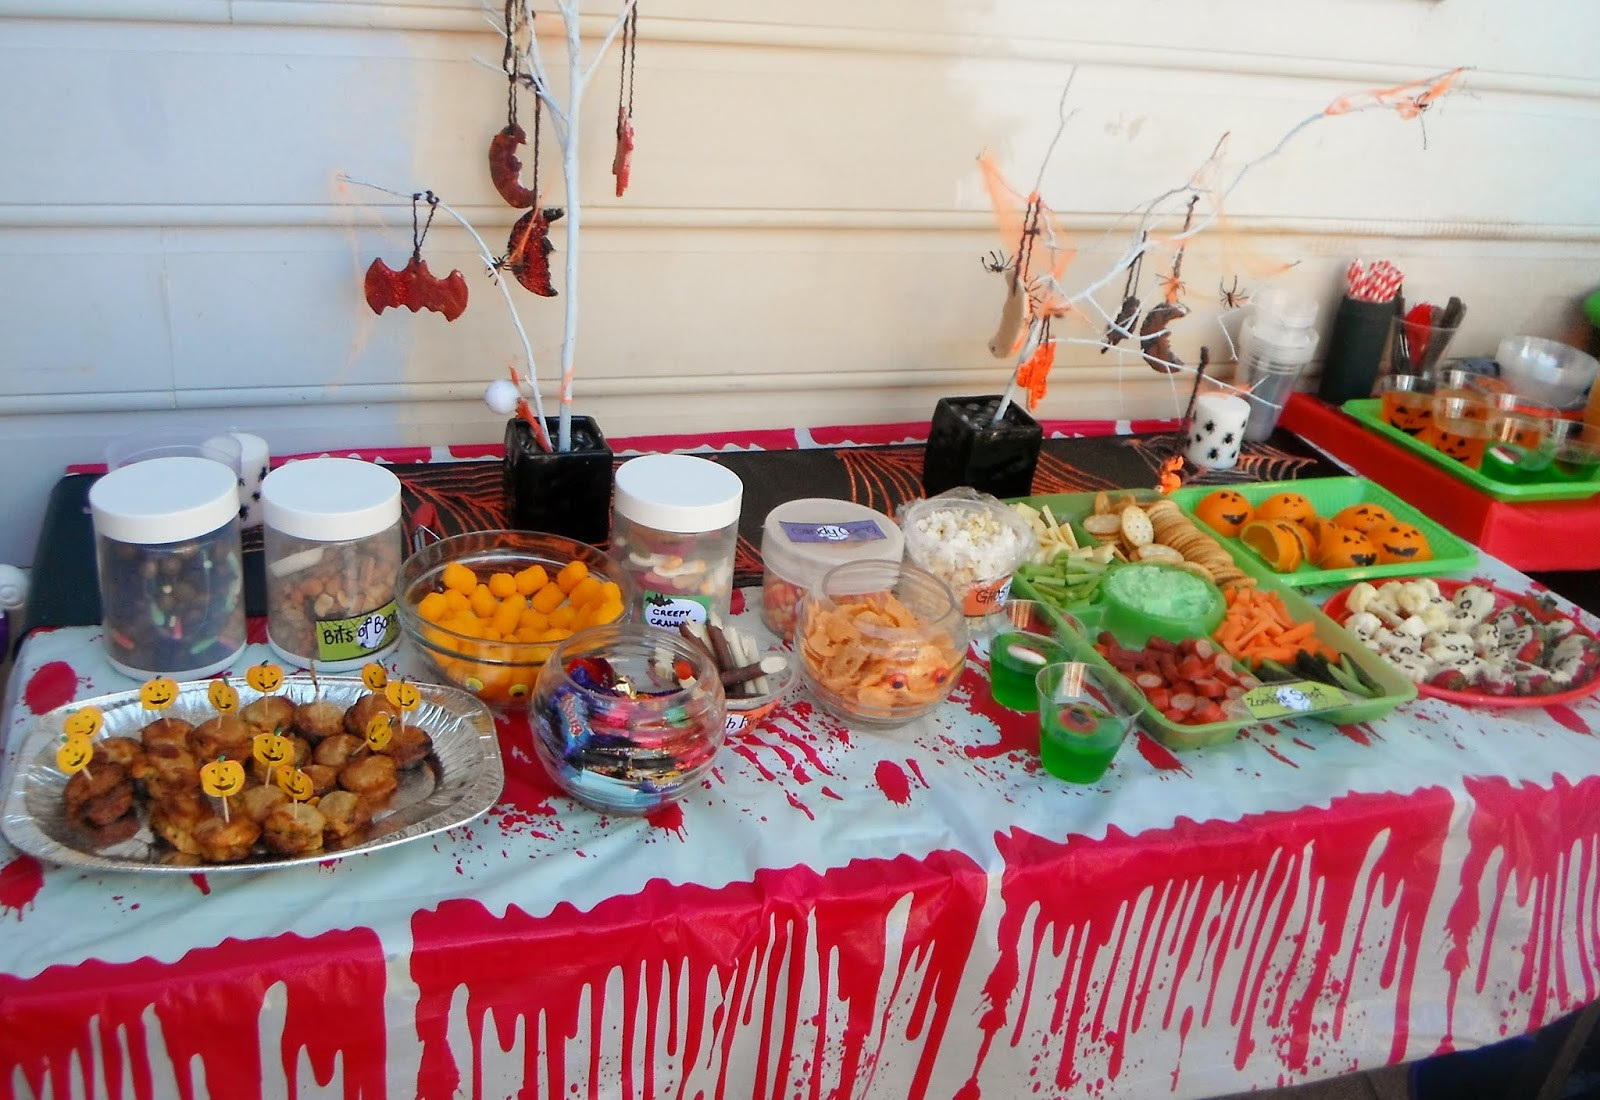 Food Ideas For A Party
 Adventures at home with Mum Halloween Party Food